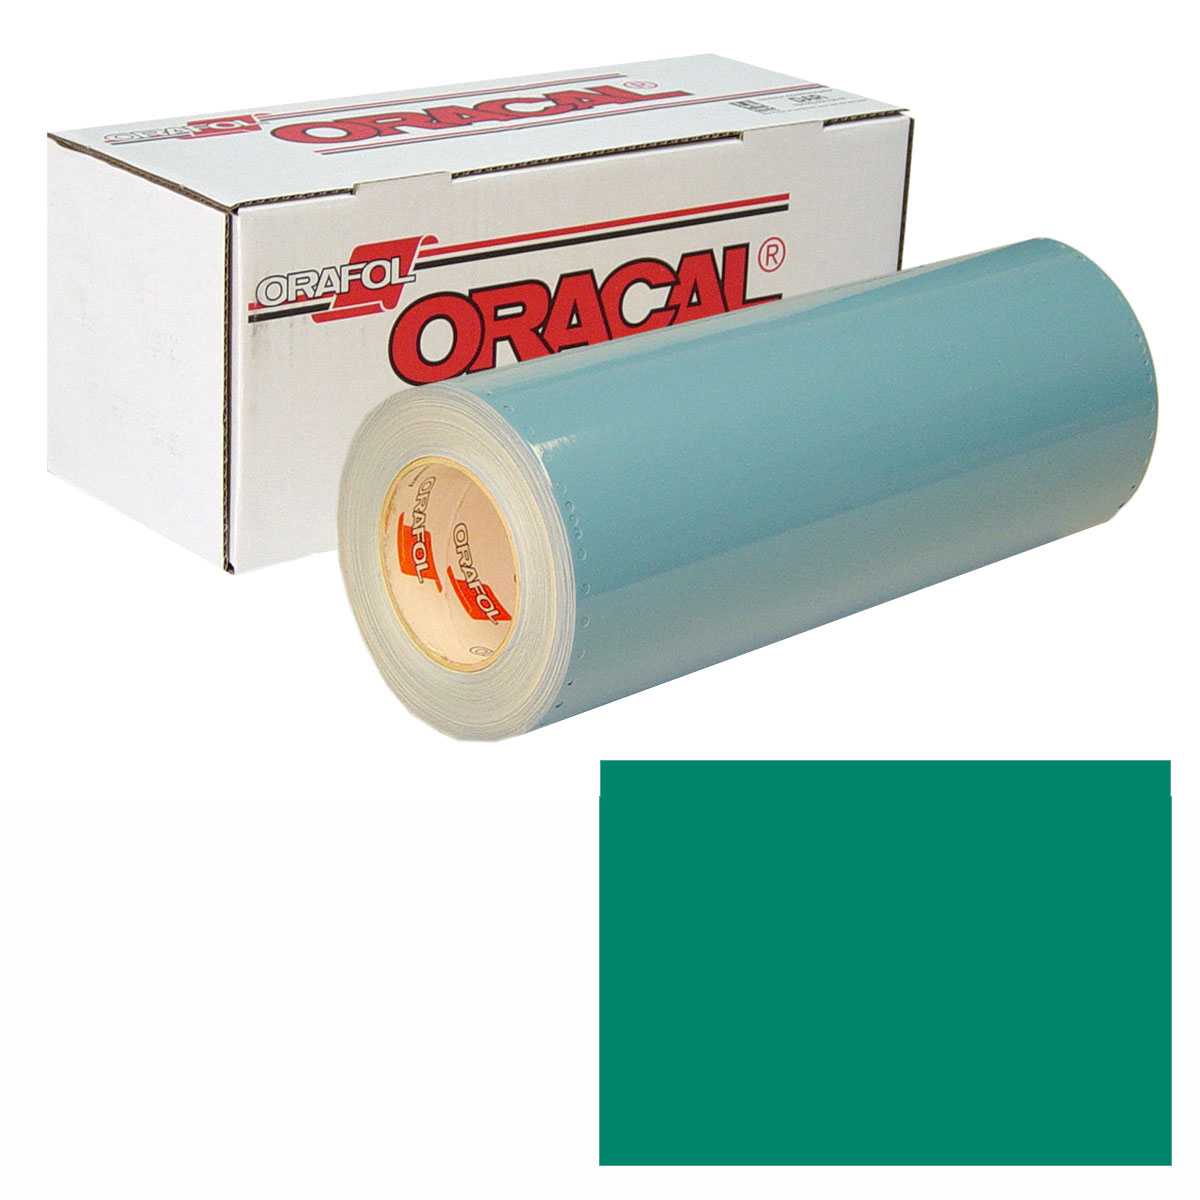 ORACAL 751 30in X 50yd 607 Turquoise Green